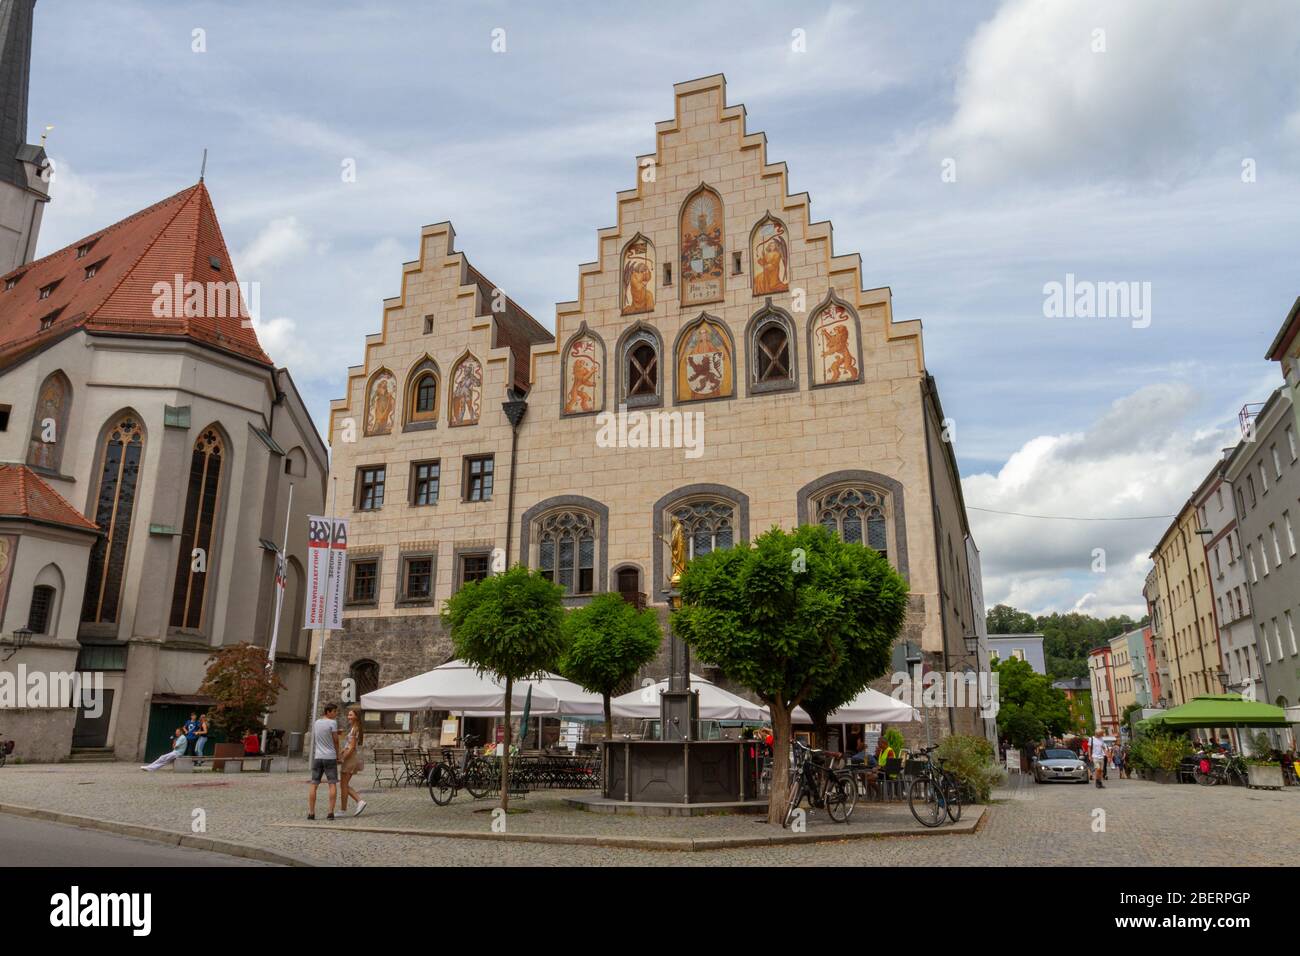 The Old Town Hall (Historisches Rathaus) in Wasserburg, Bavaria, Germany. Stock Photo